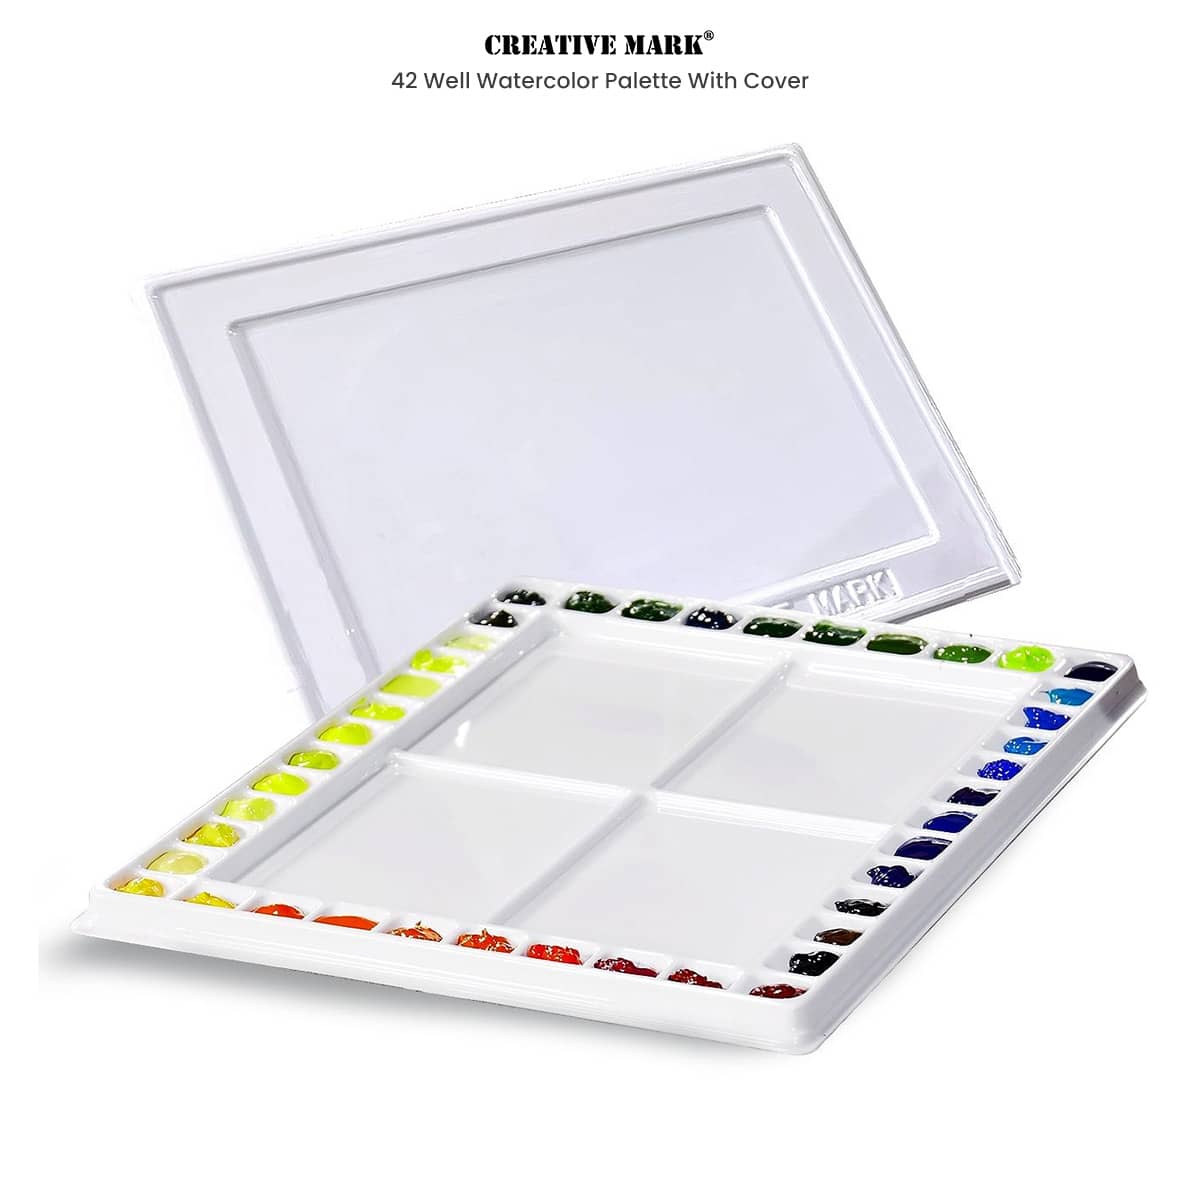 Empty Watercolor Palette with Lid 48+15 Half Pans with Fold-Out Palette by  DUGATO, 5 Large Mixing Area, Metal Tin Box for Watercolor Acrylic Oil DIY